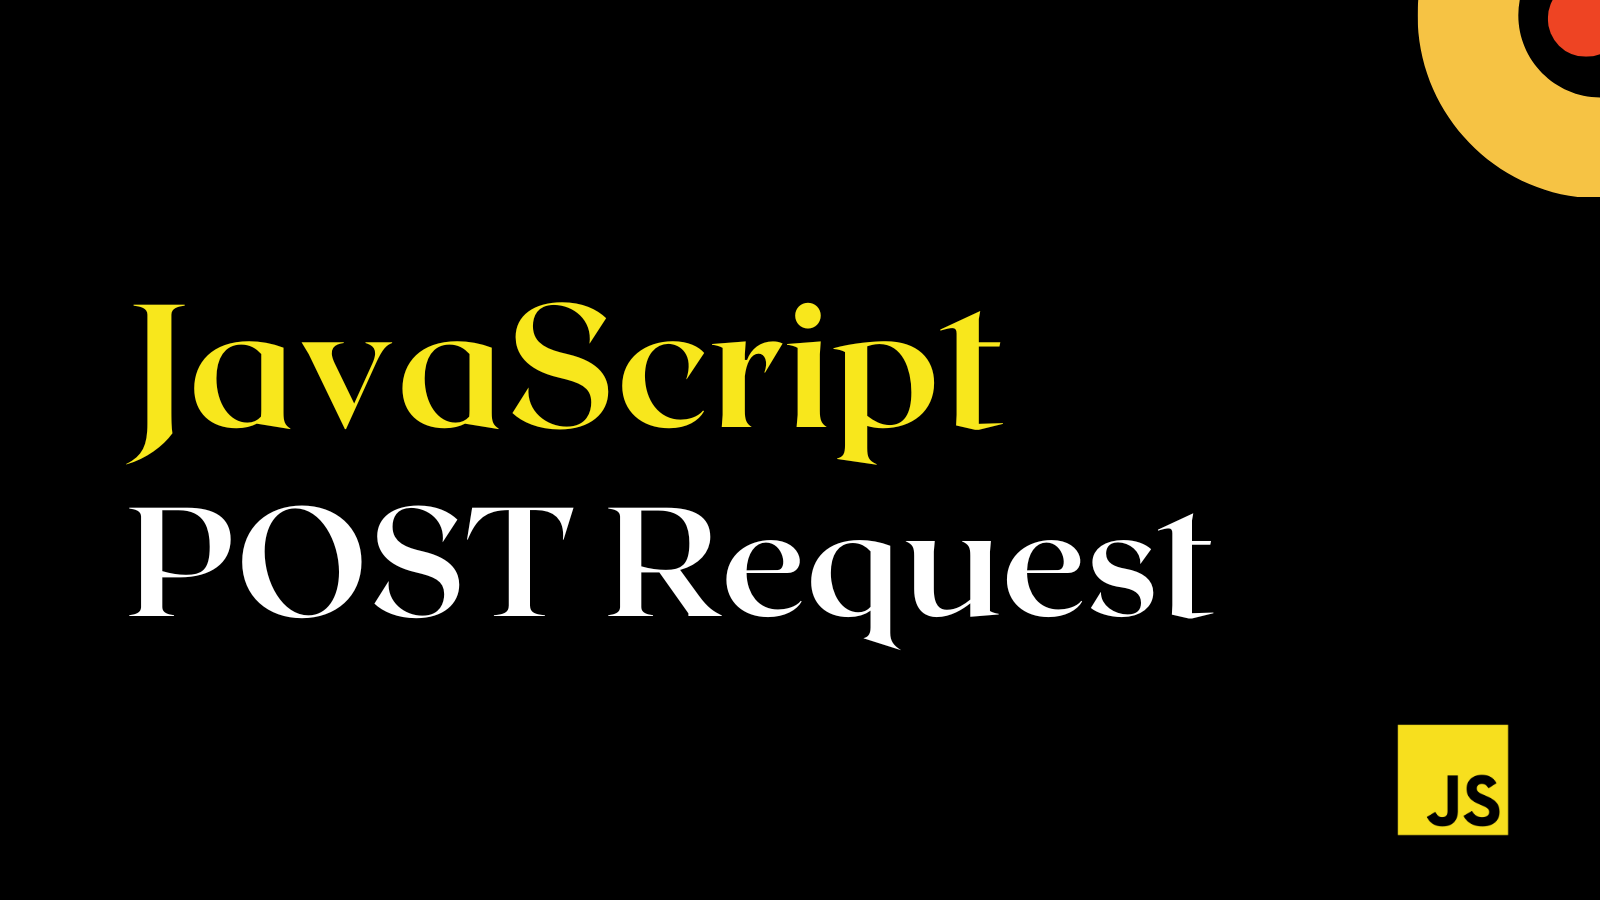 JavaScript Post Request: How to Send an HTTP POST Request in JavaScript